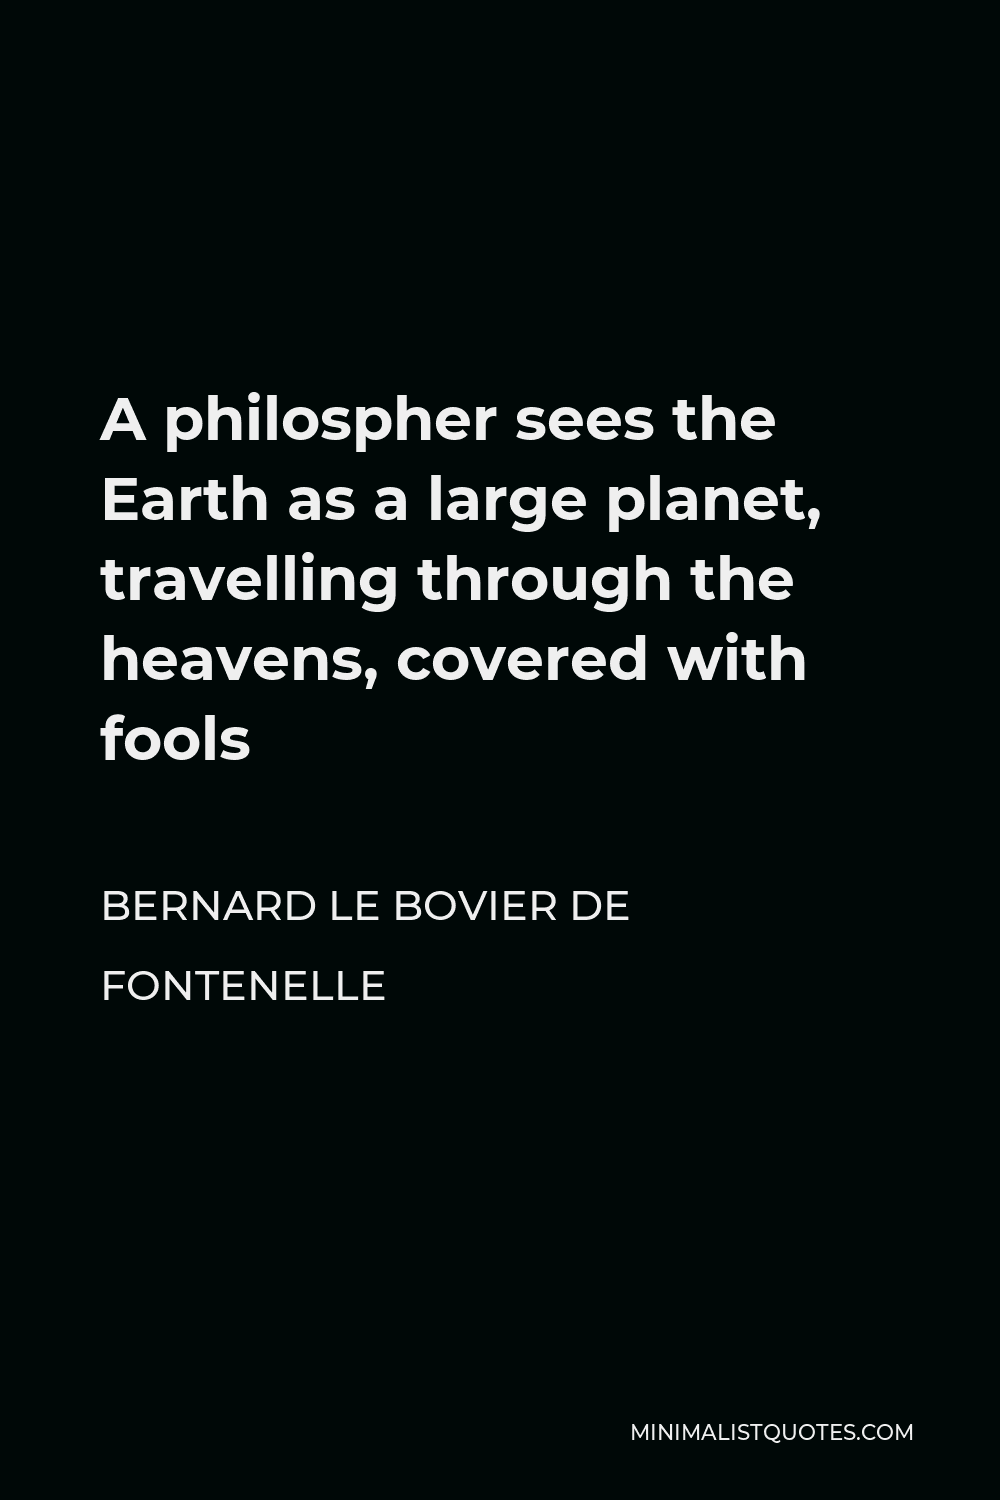 Bernard le Bovier de Fontenelle Quote - A philospher sees the Earth as a large planet, travelling through the heavens, covered with fools